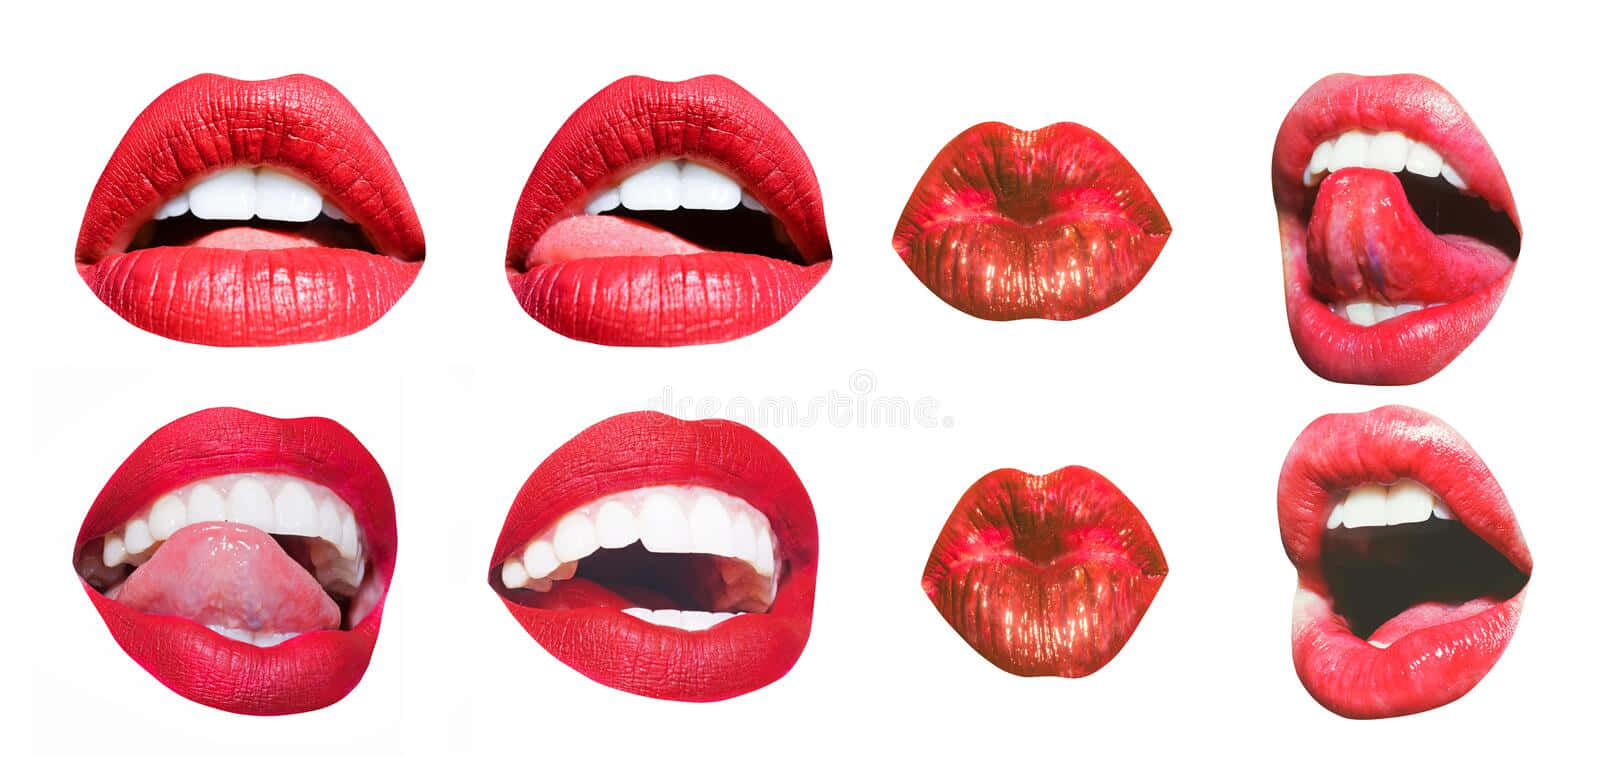 Pouting Red Lips Tongue Out Wallpaper